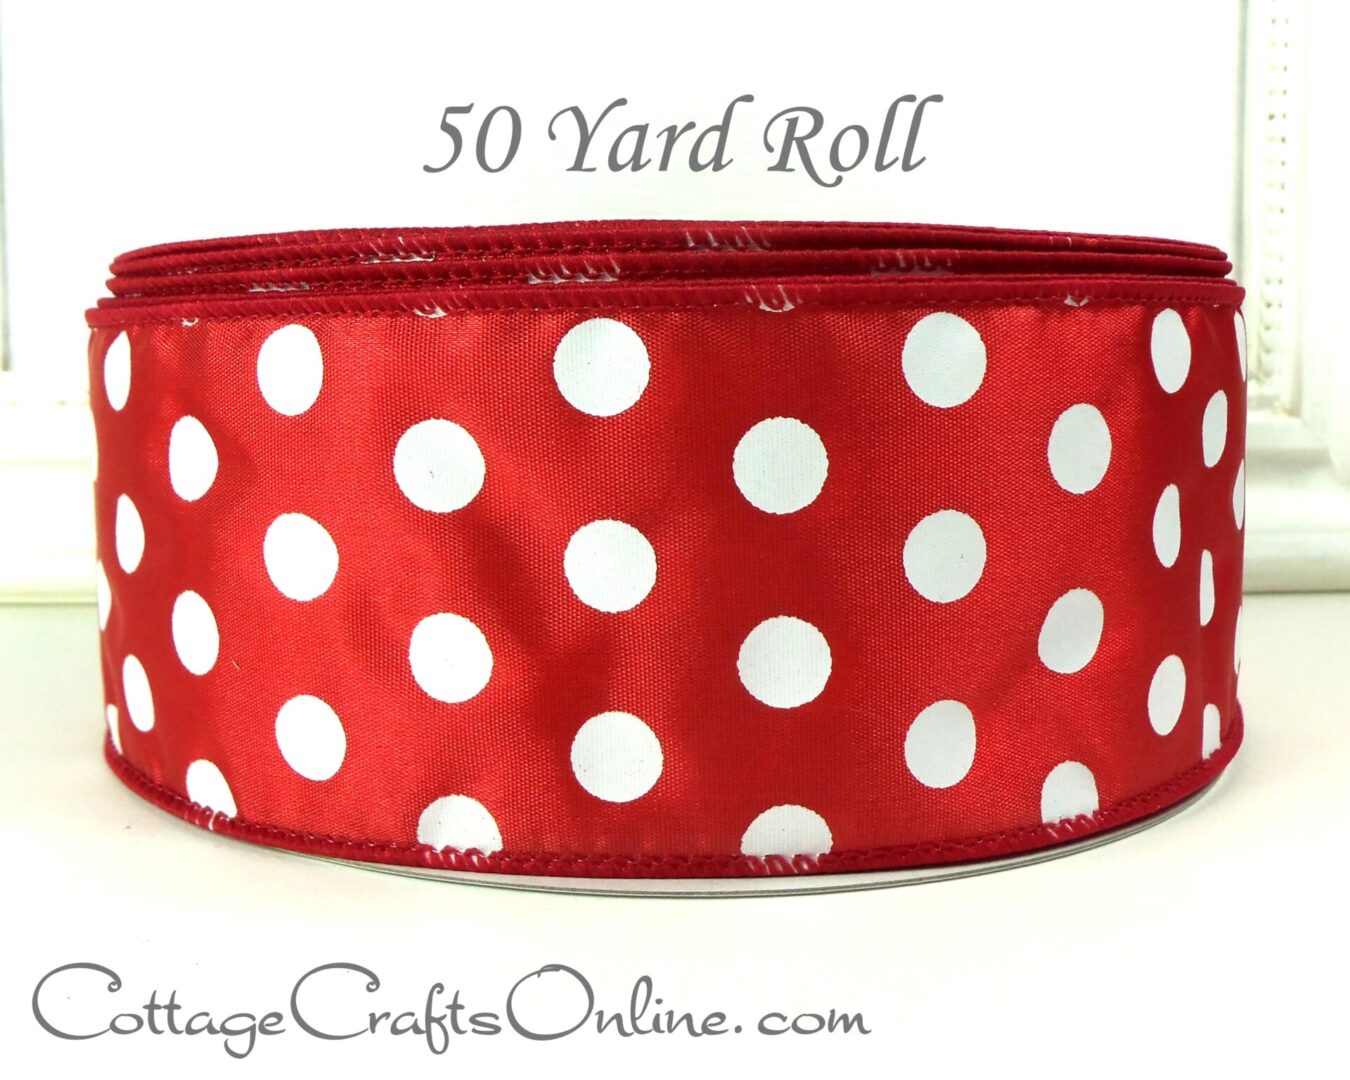 A red ribbon with white polka dots on it.